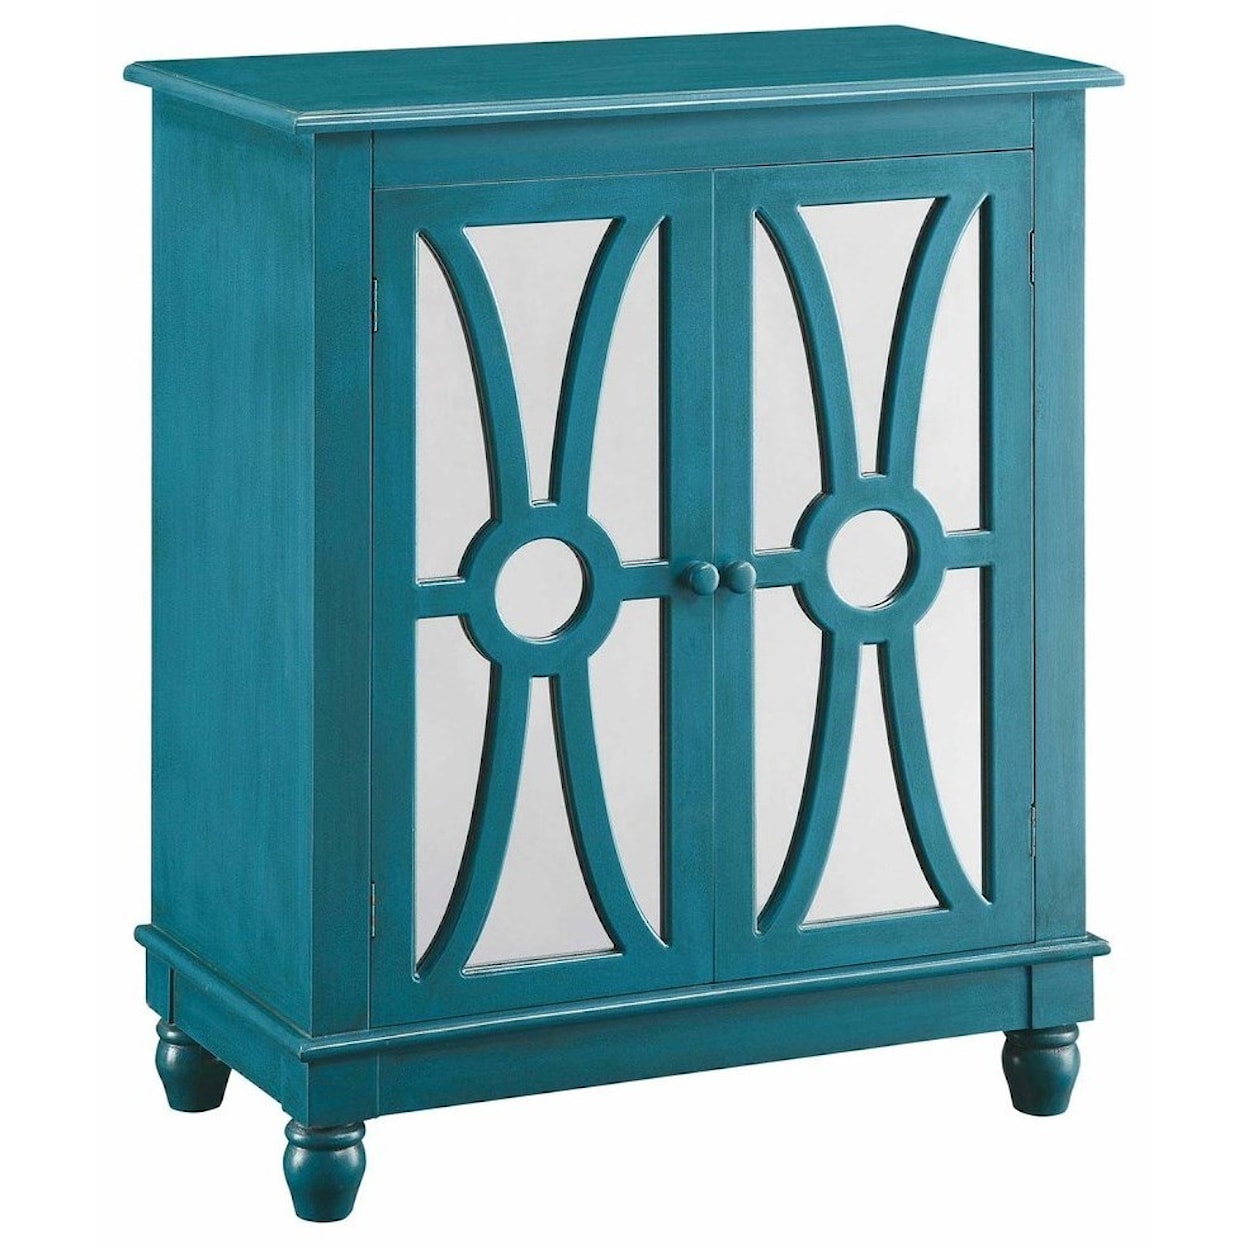 Crestview Collection Accent Furniture Clairemont Turquoise 2 Door Cabinet